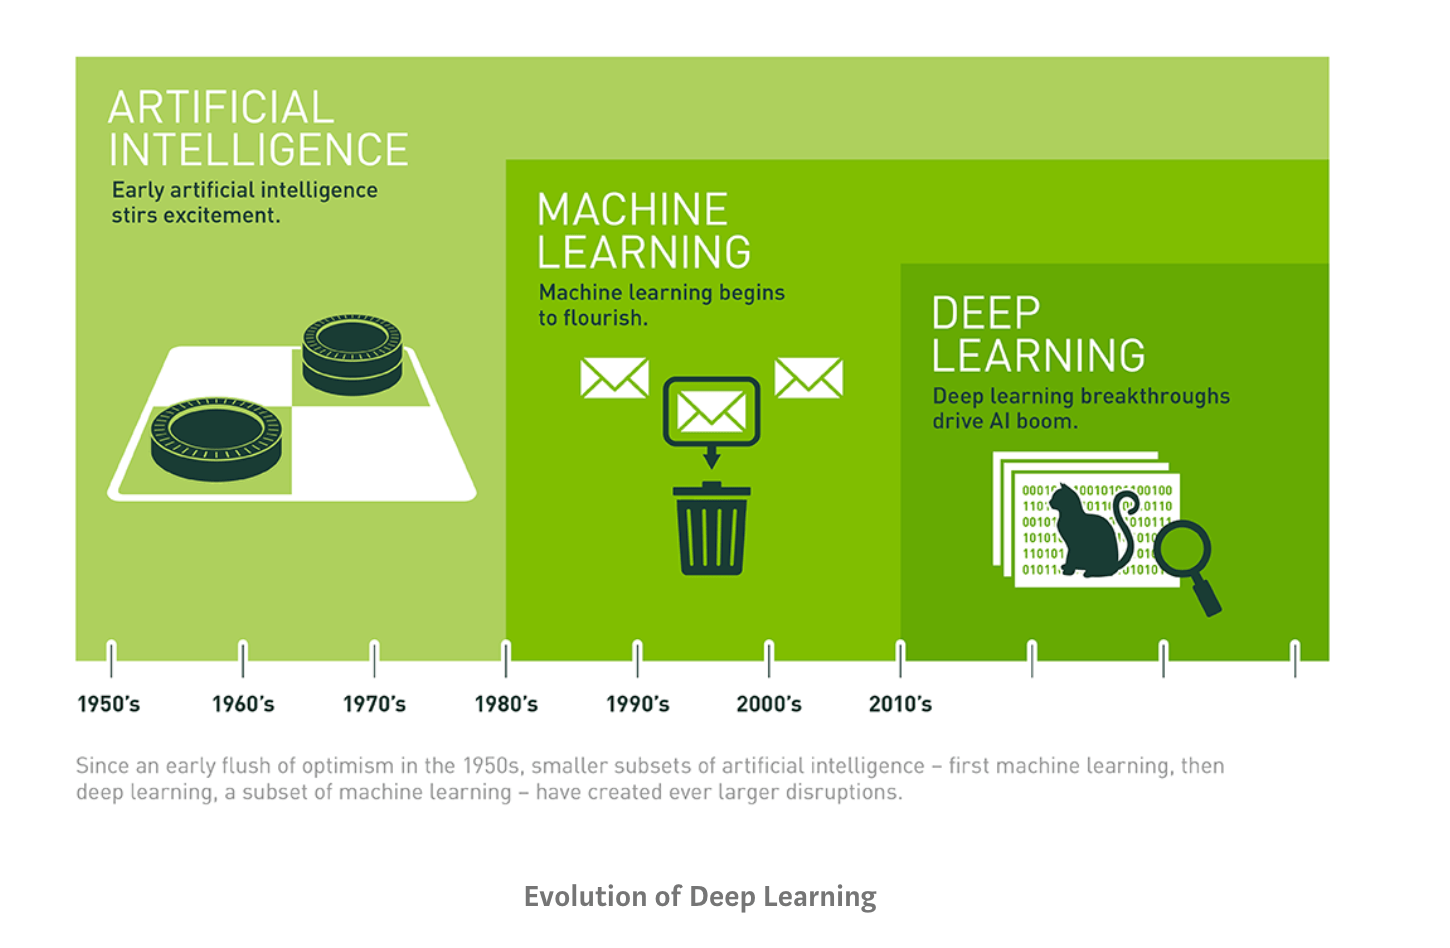 A diagram showing the progression from Artificial Intelligence, to Machine Learning, to Deep Learning from the 1950s to modern day.